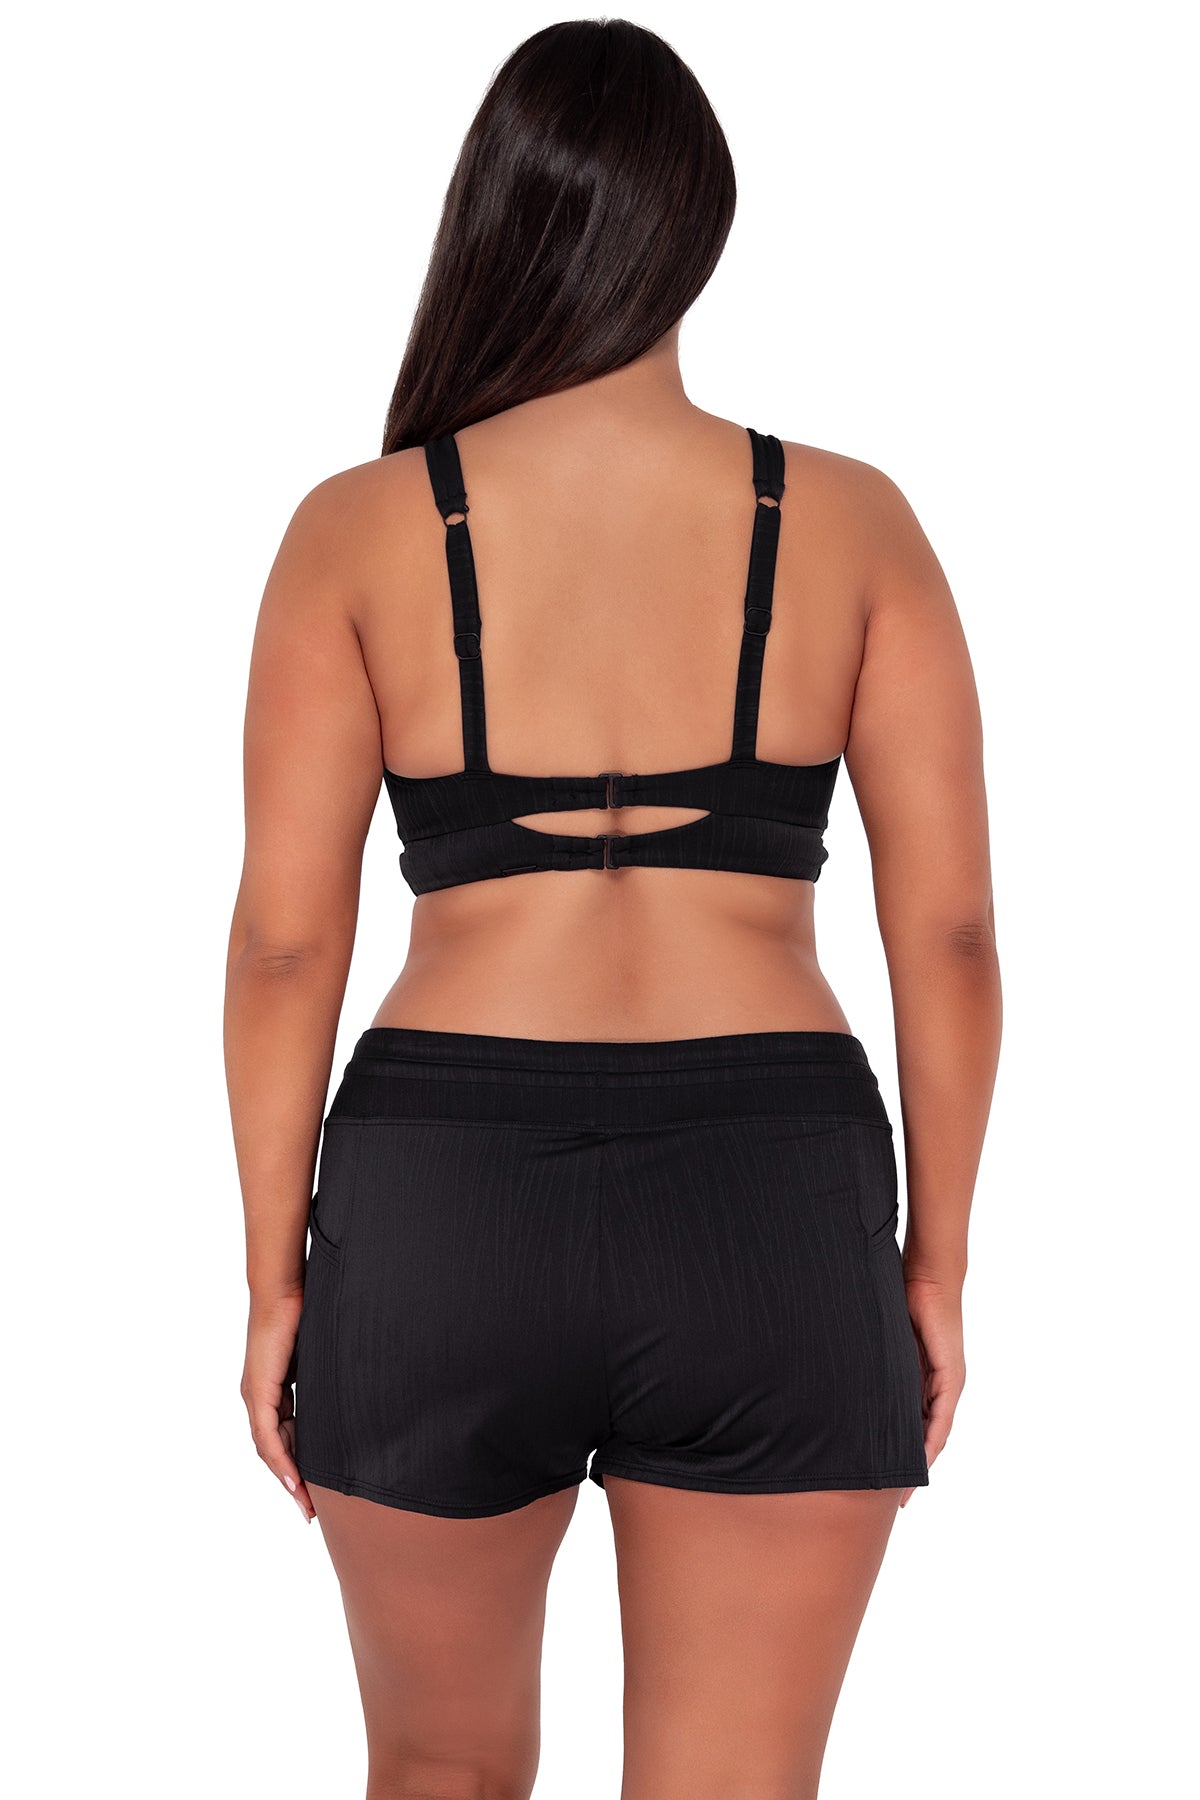 Back pose #1 of Nicki wearing Sunsets Black Seagrass Texture Danica Top paired with Laguna Swim Short women's casual wear